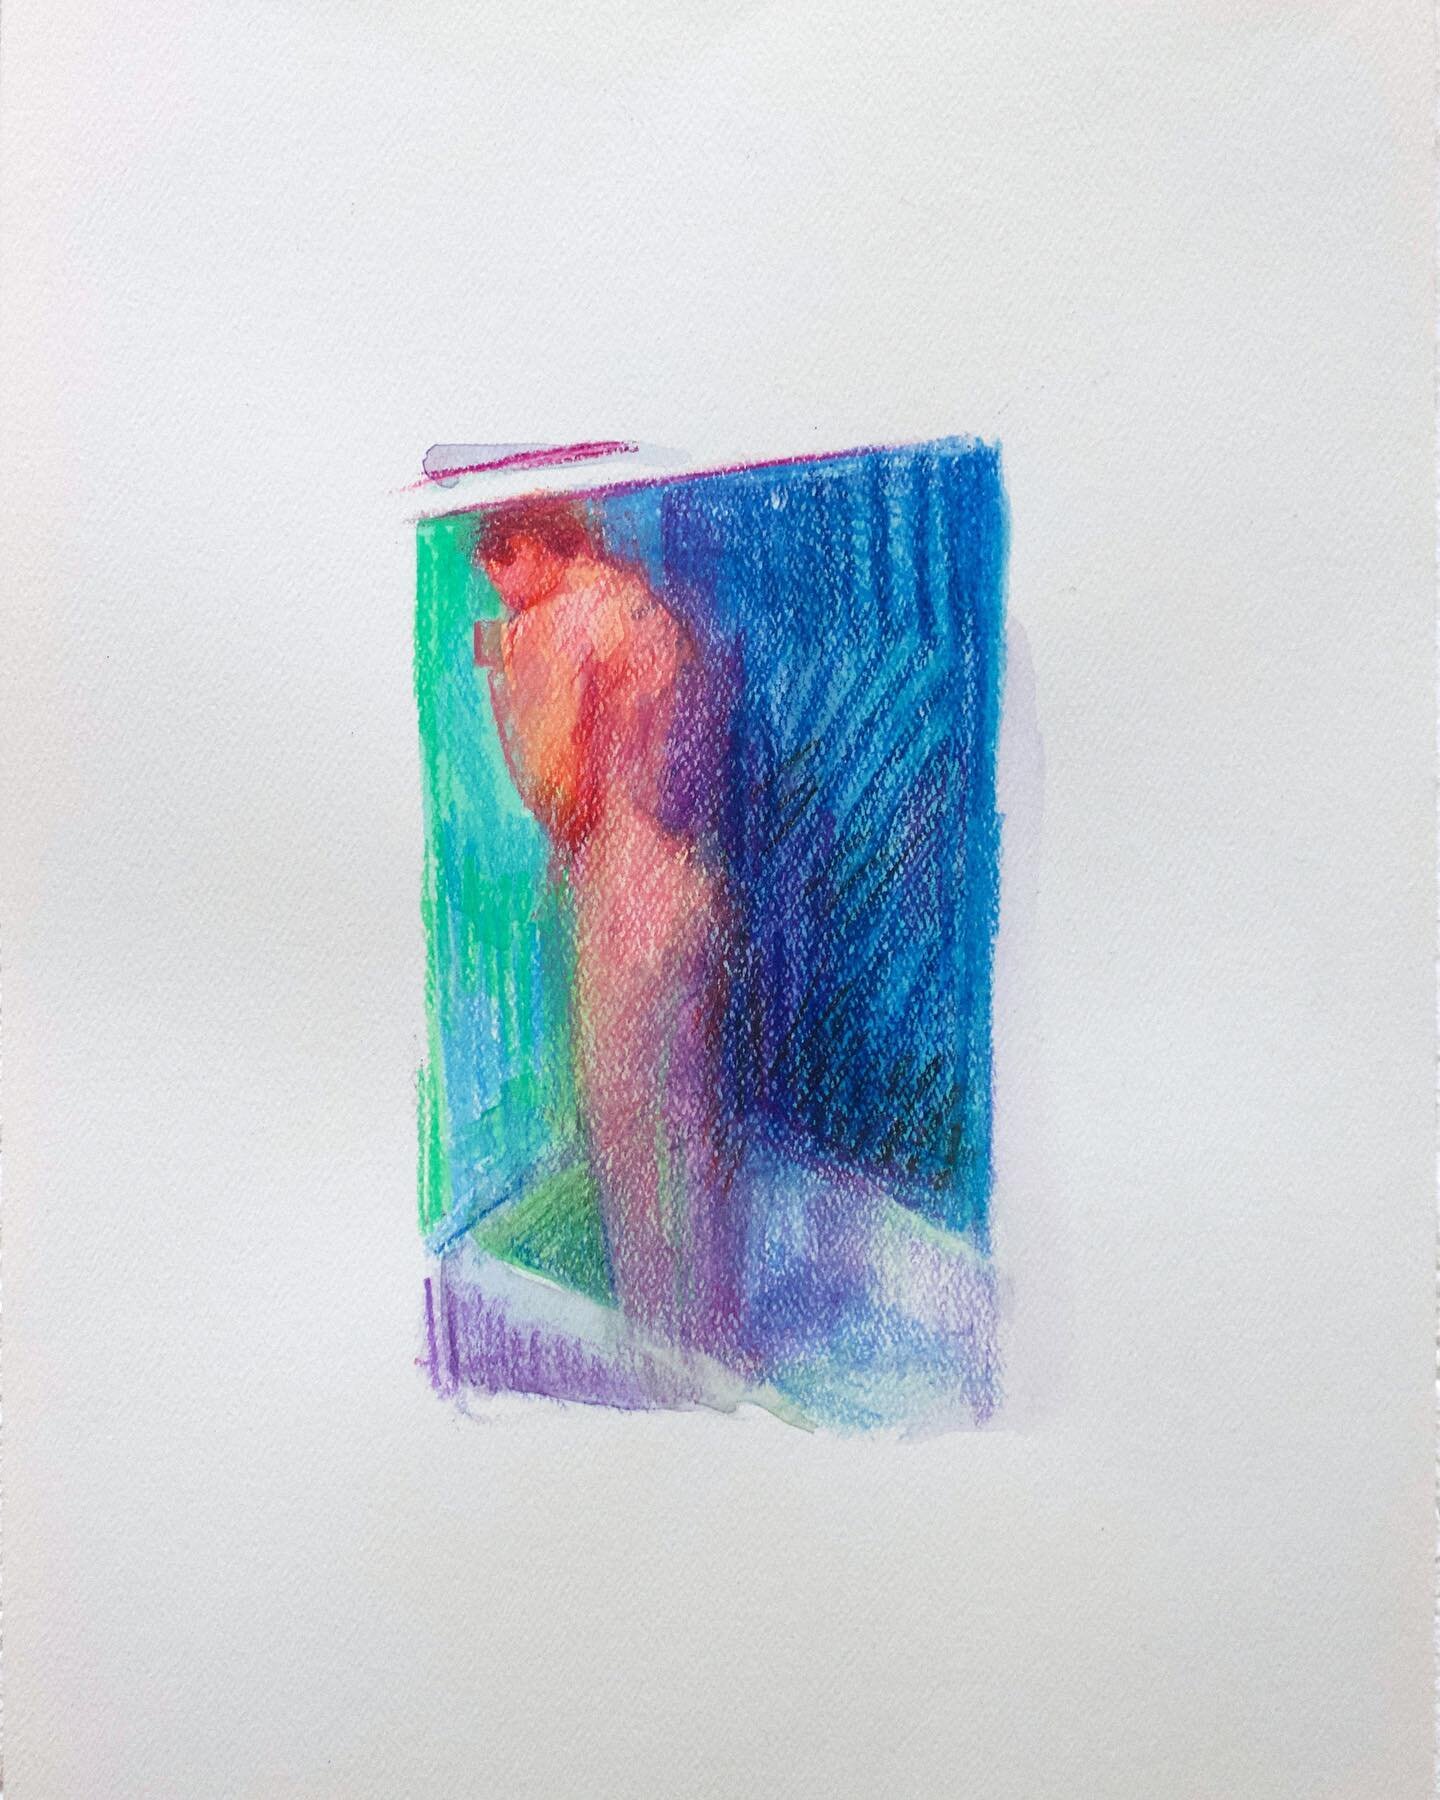 Rachel Rickert&rsquo;s work on paper &ldquo;Glass Box&rdquo; in A SPECIES OF WRITING on auxierkline.com 

Rachel Rickert, Glass Box, watercolor and color pencil on paper, 12 x 9 inches, 2021